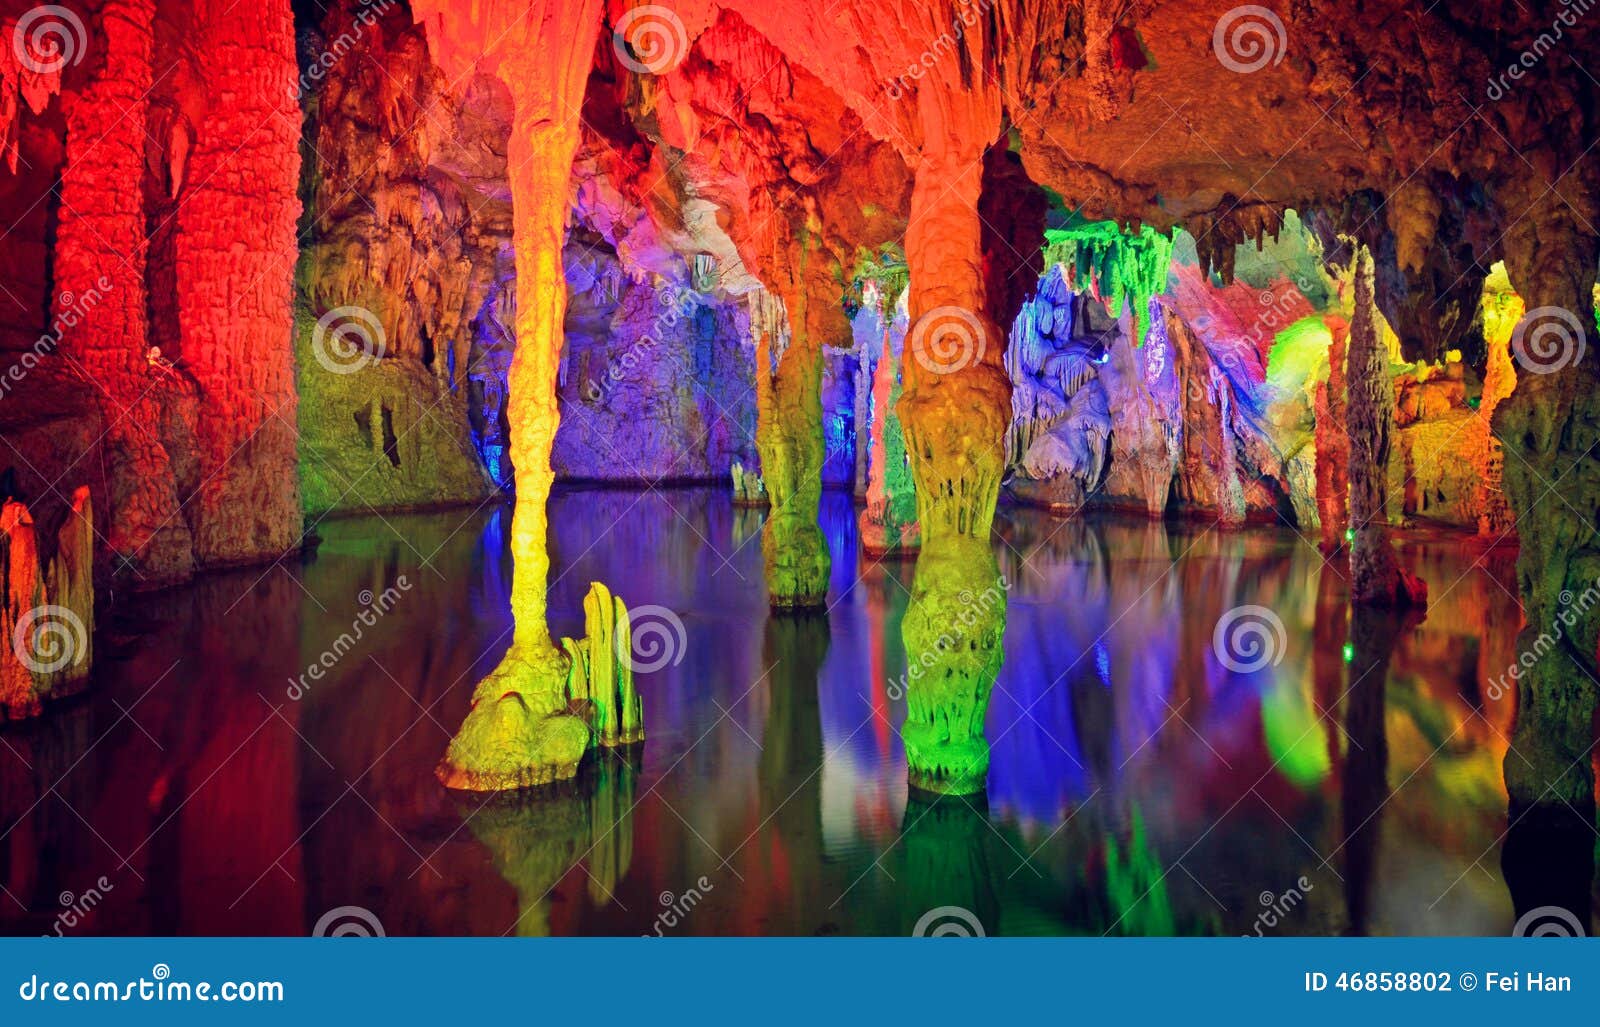 stalactite and water in karst cave of gui lin,china